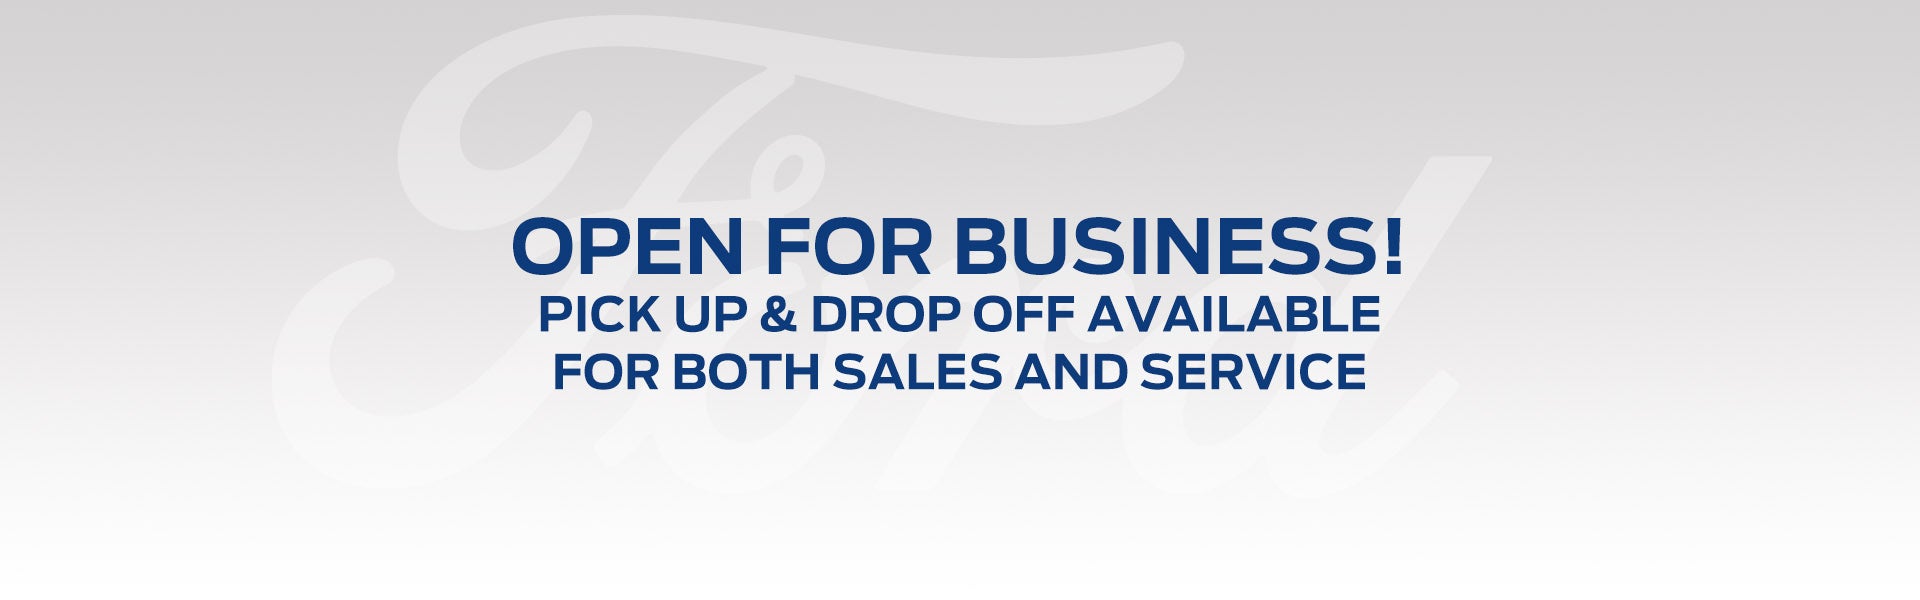 Open for Business - Pick Up & Drop Off Available at McMahon